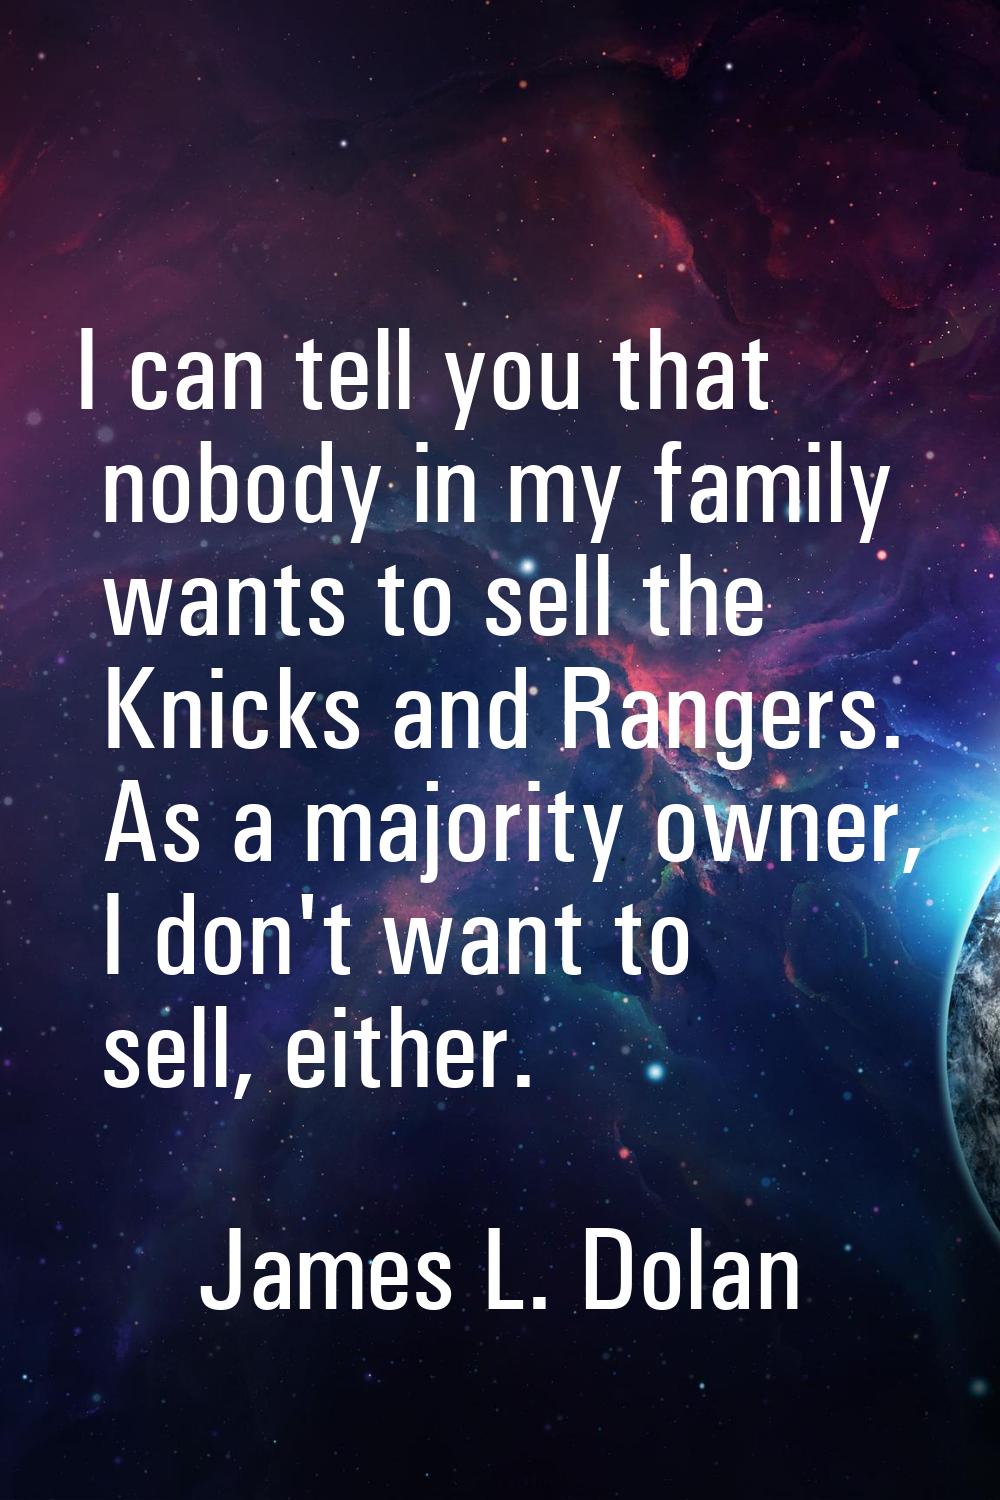 I can tell you that nobody in my family wants to sell the Knicks and Rangers. As a majority owner, 